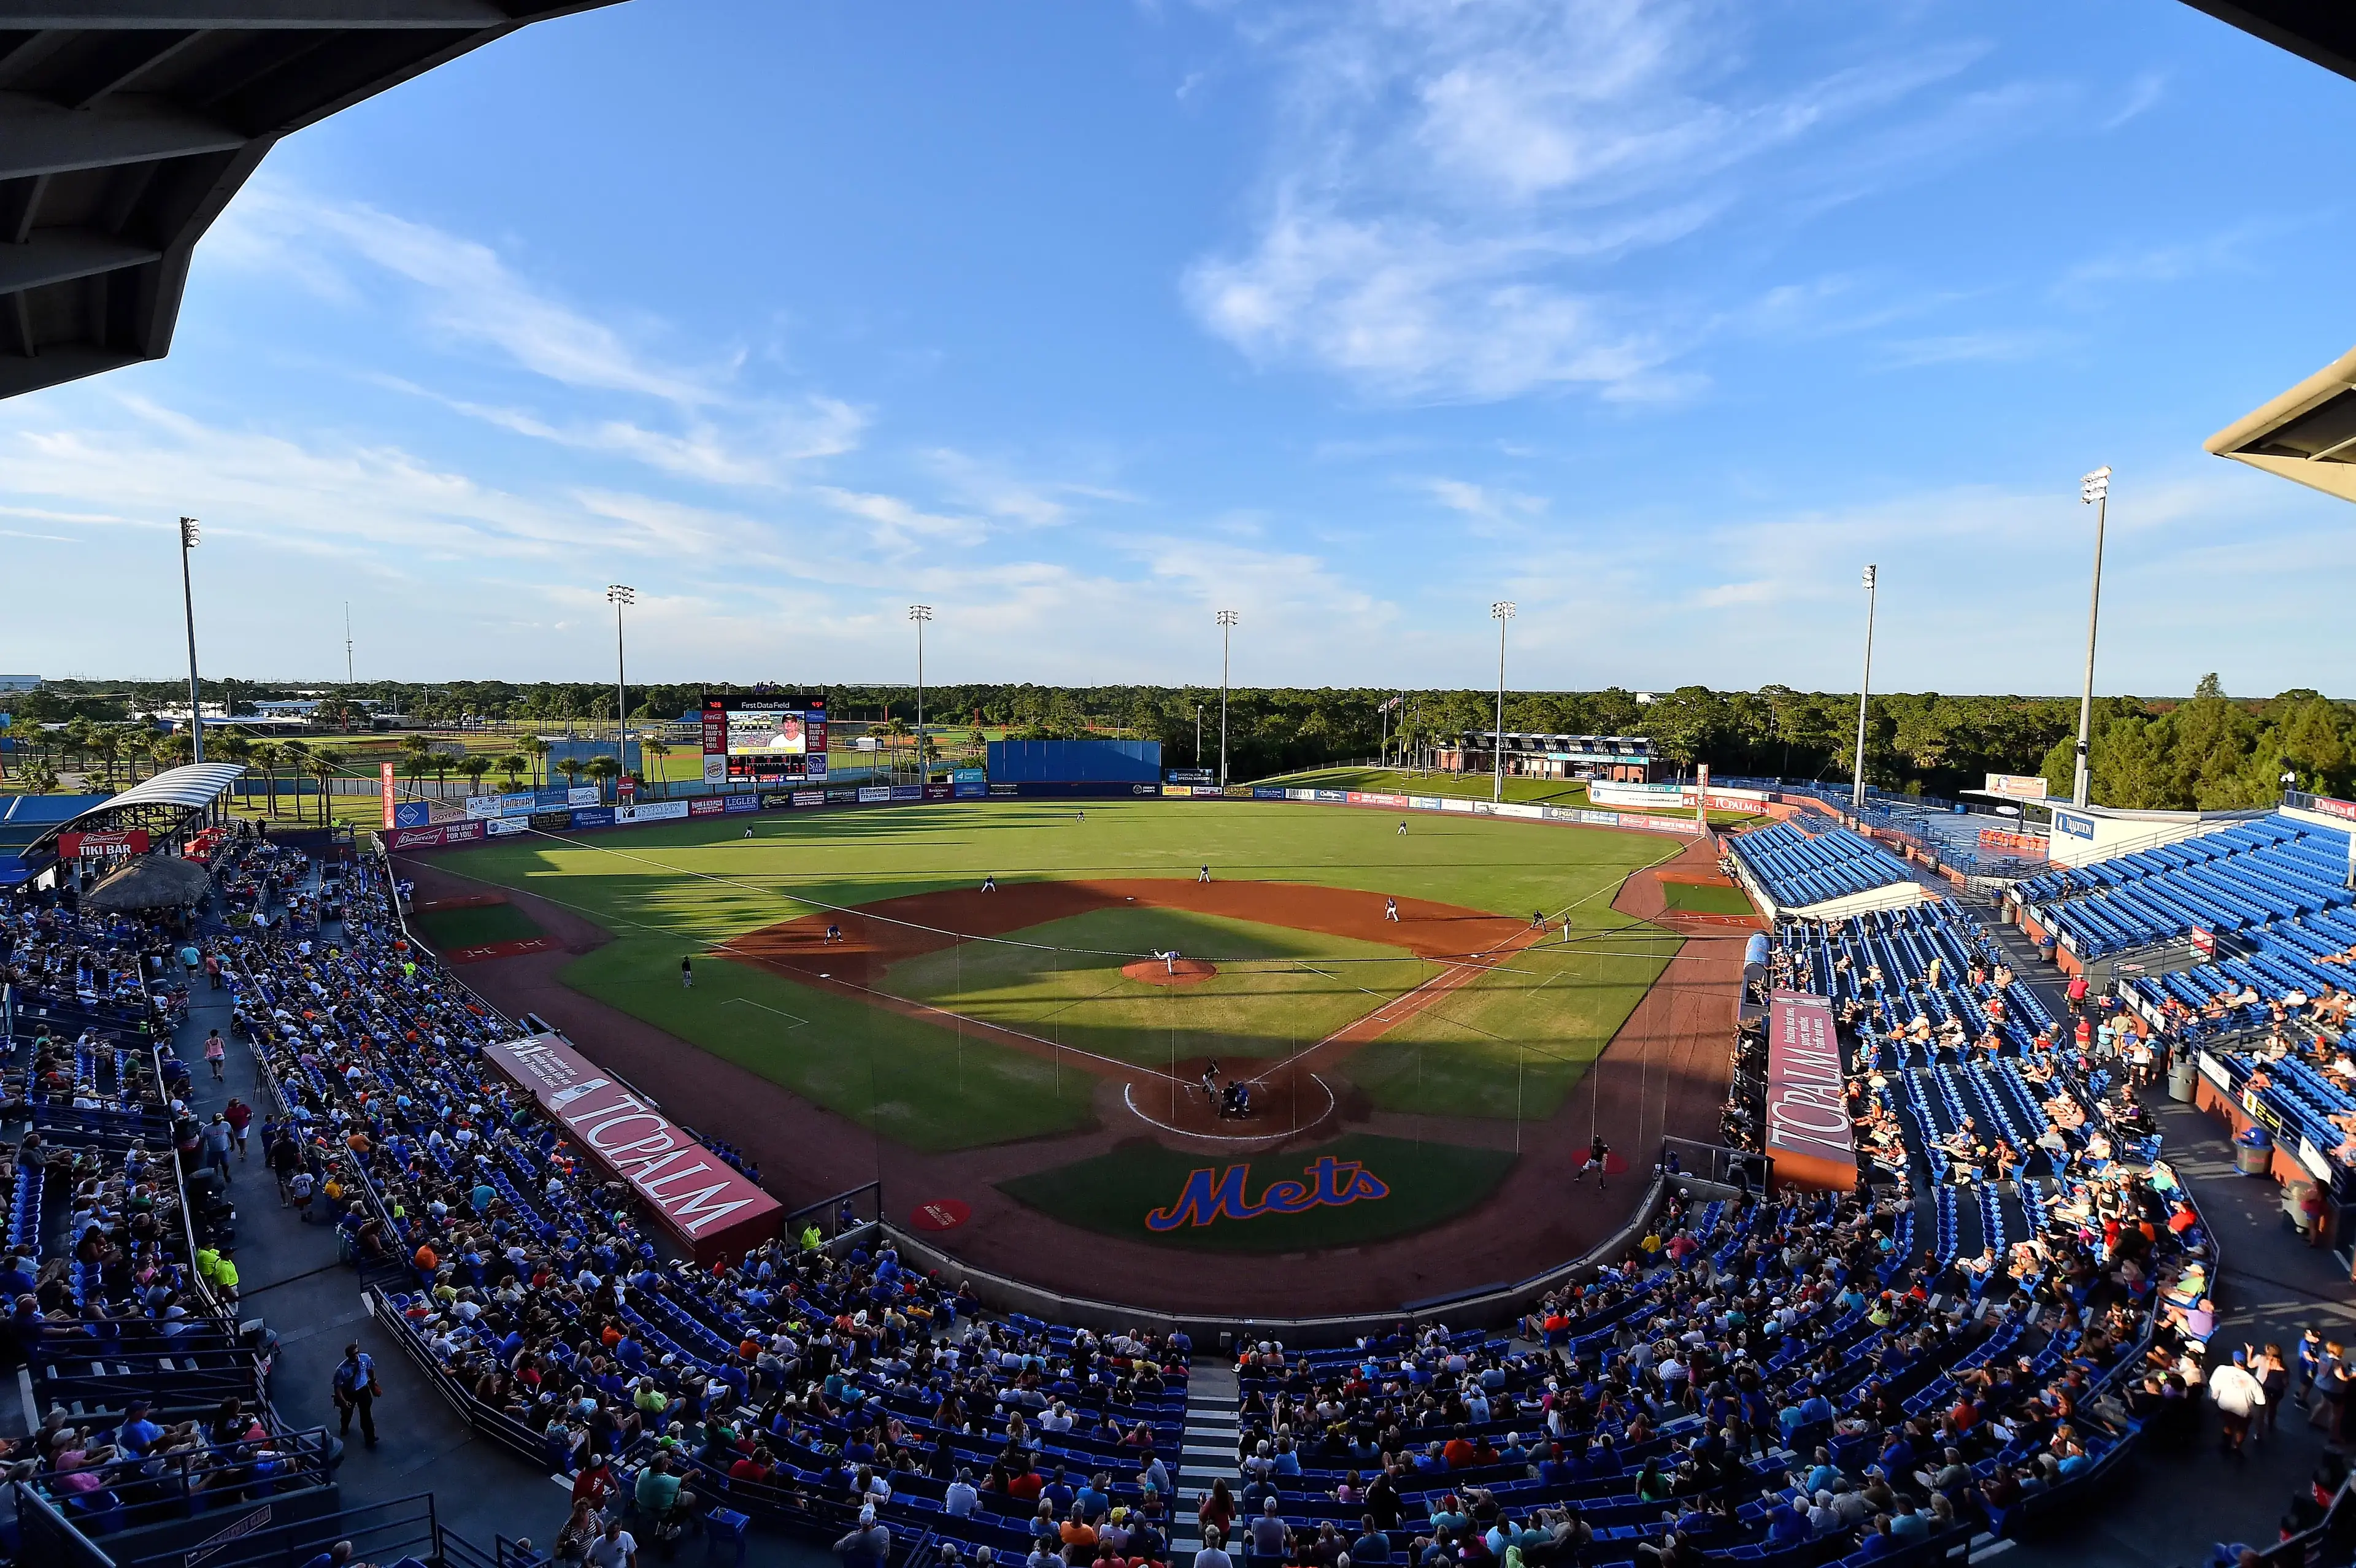 A general view at Mets Spring Training / USA Today